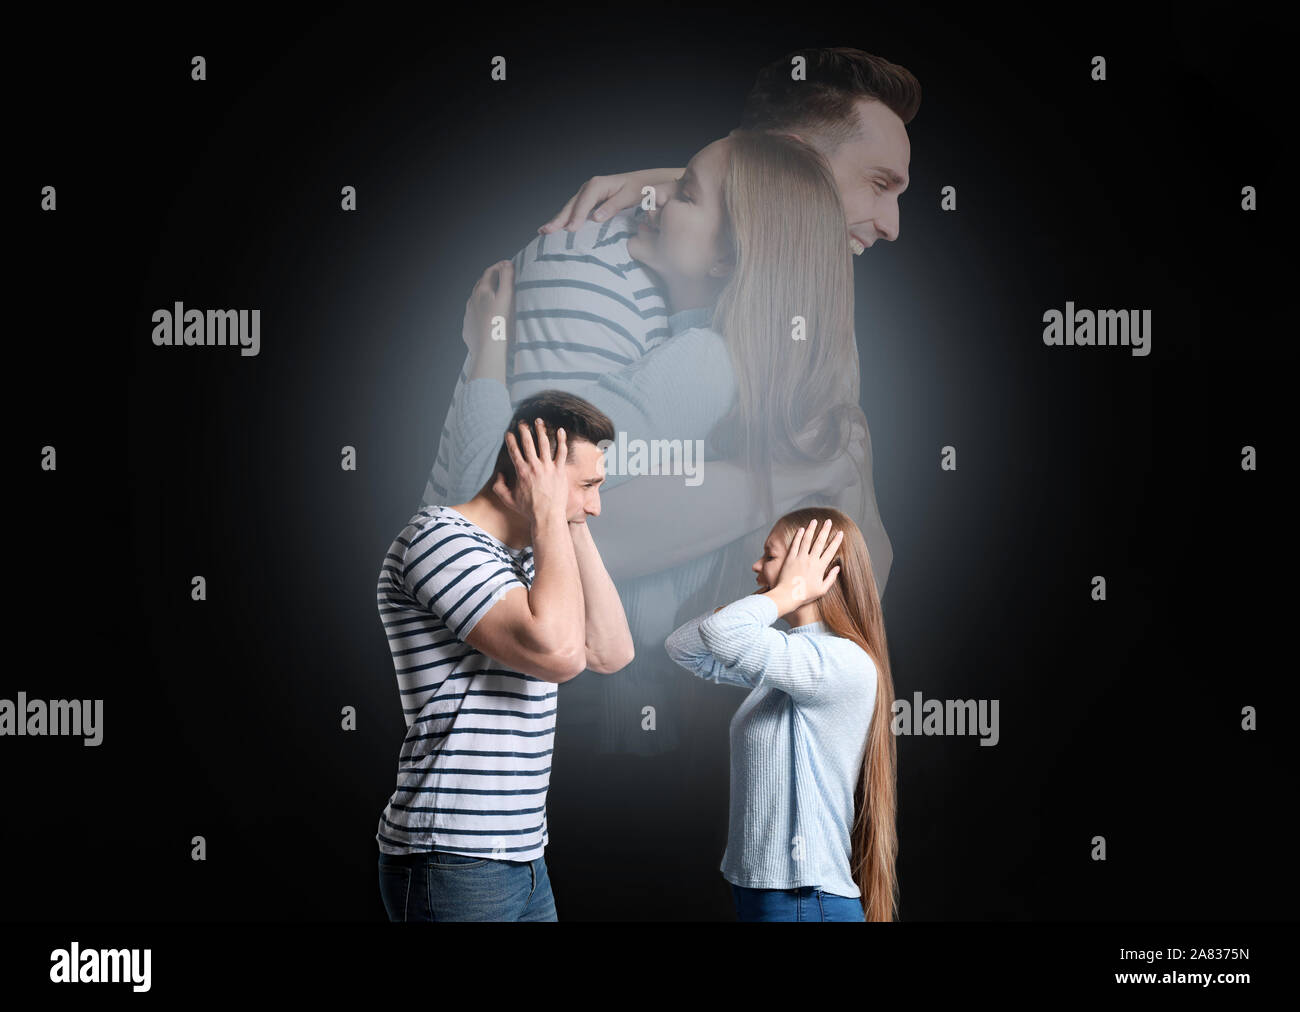 Quarreling young couple dreaming about making peace on dark background Stock Photo